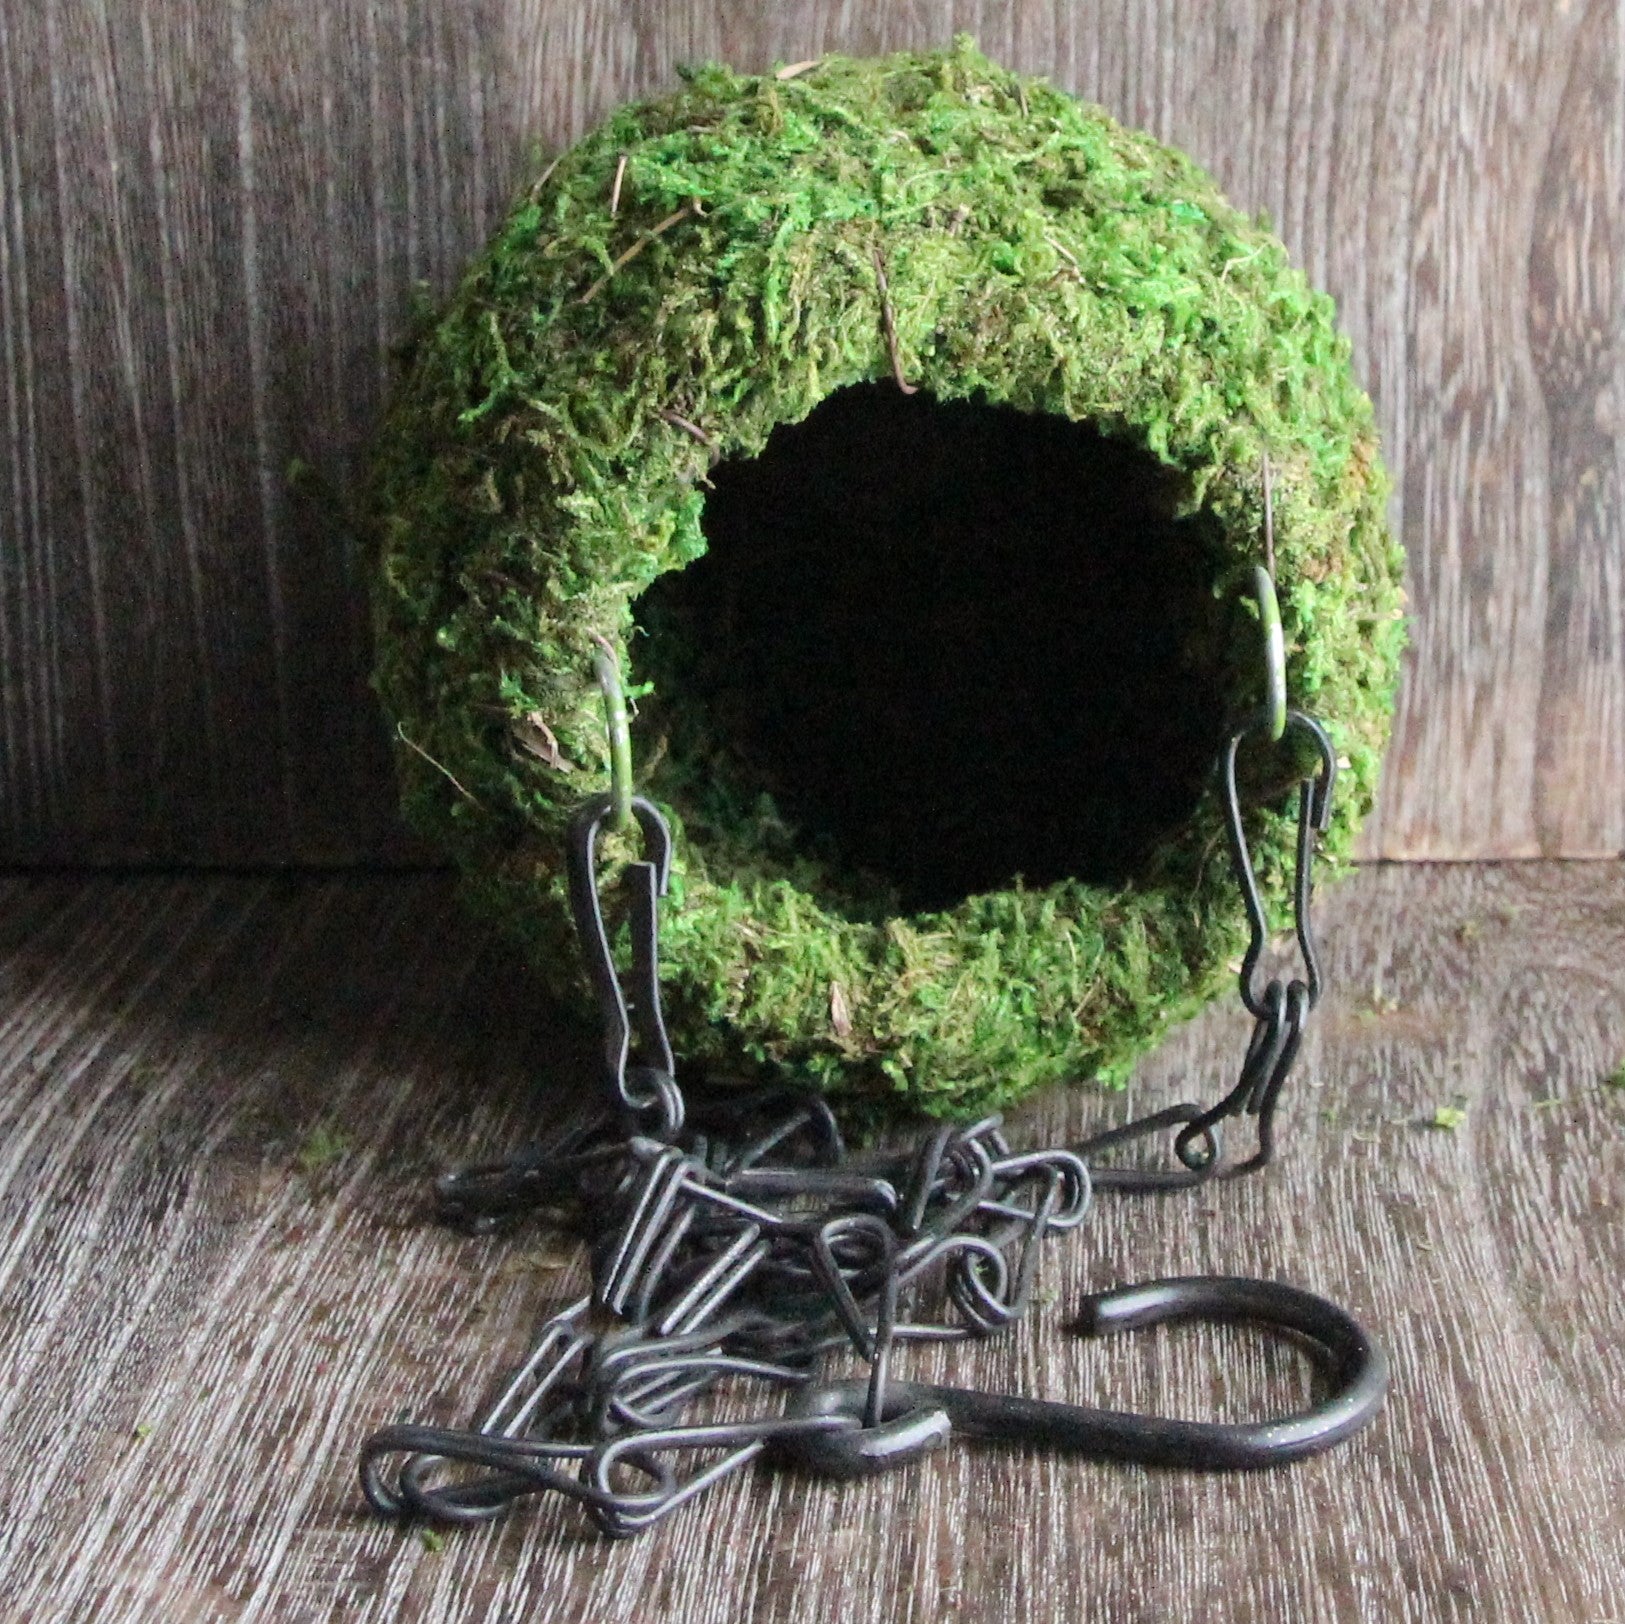 Mossy Hide with Chain The Reptiles of Eden